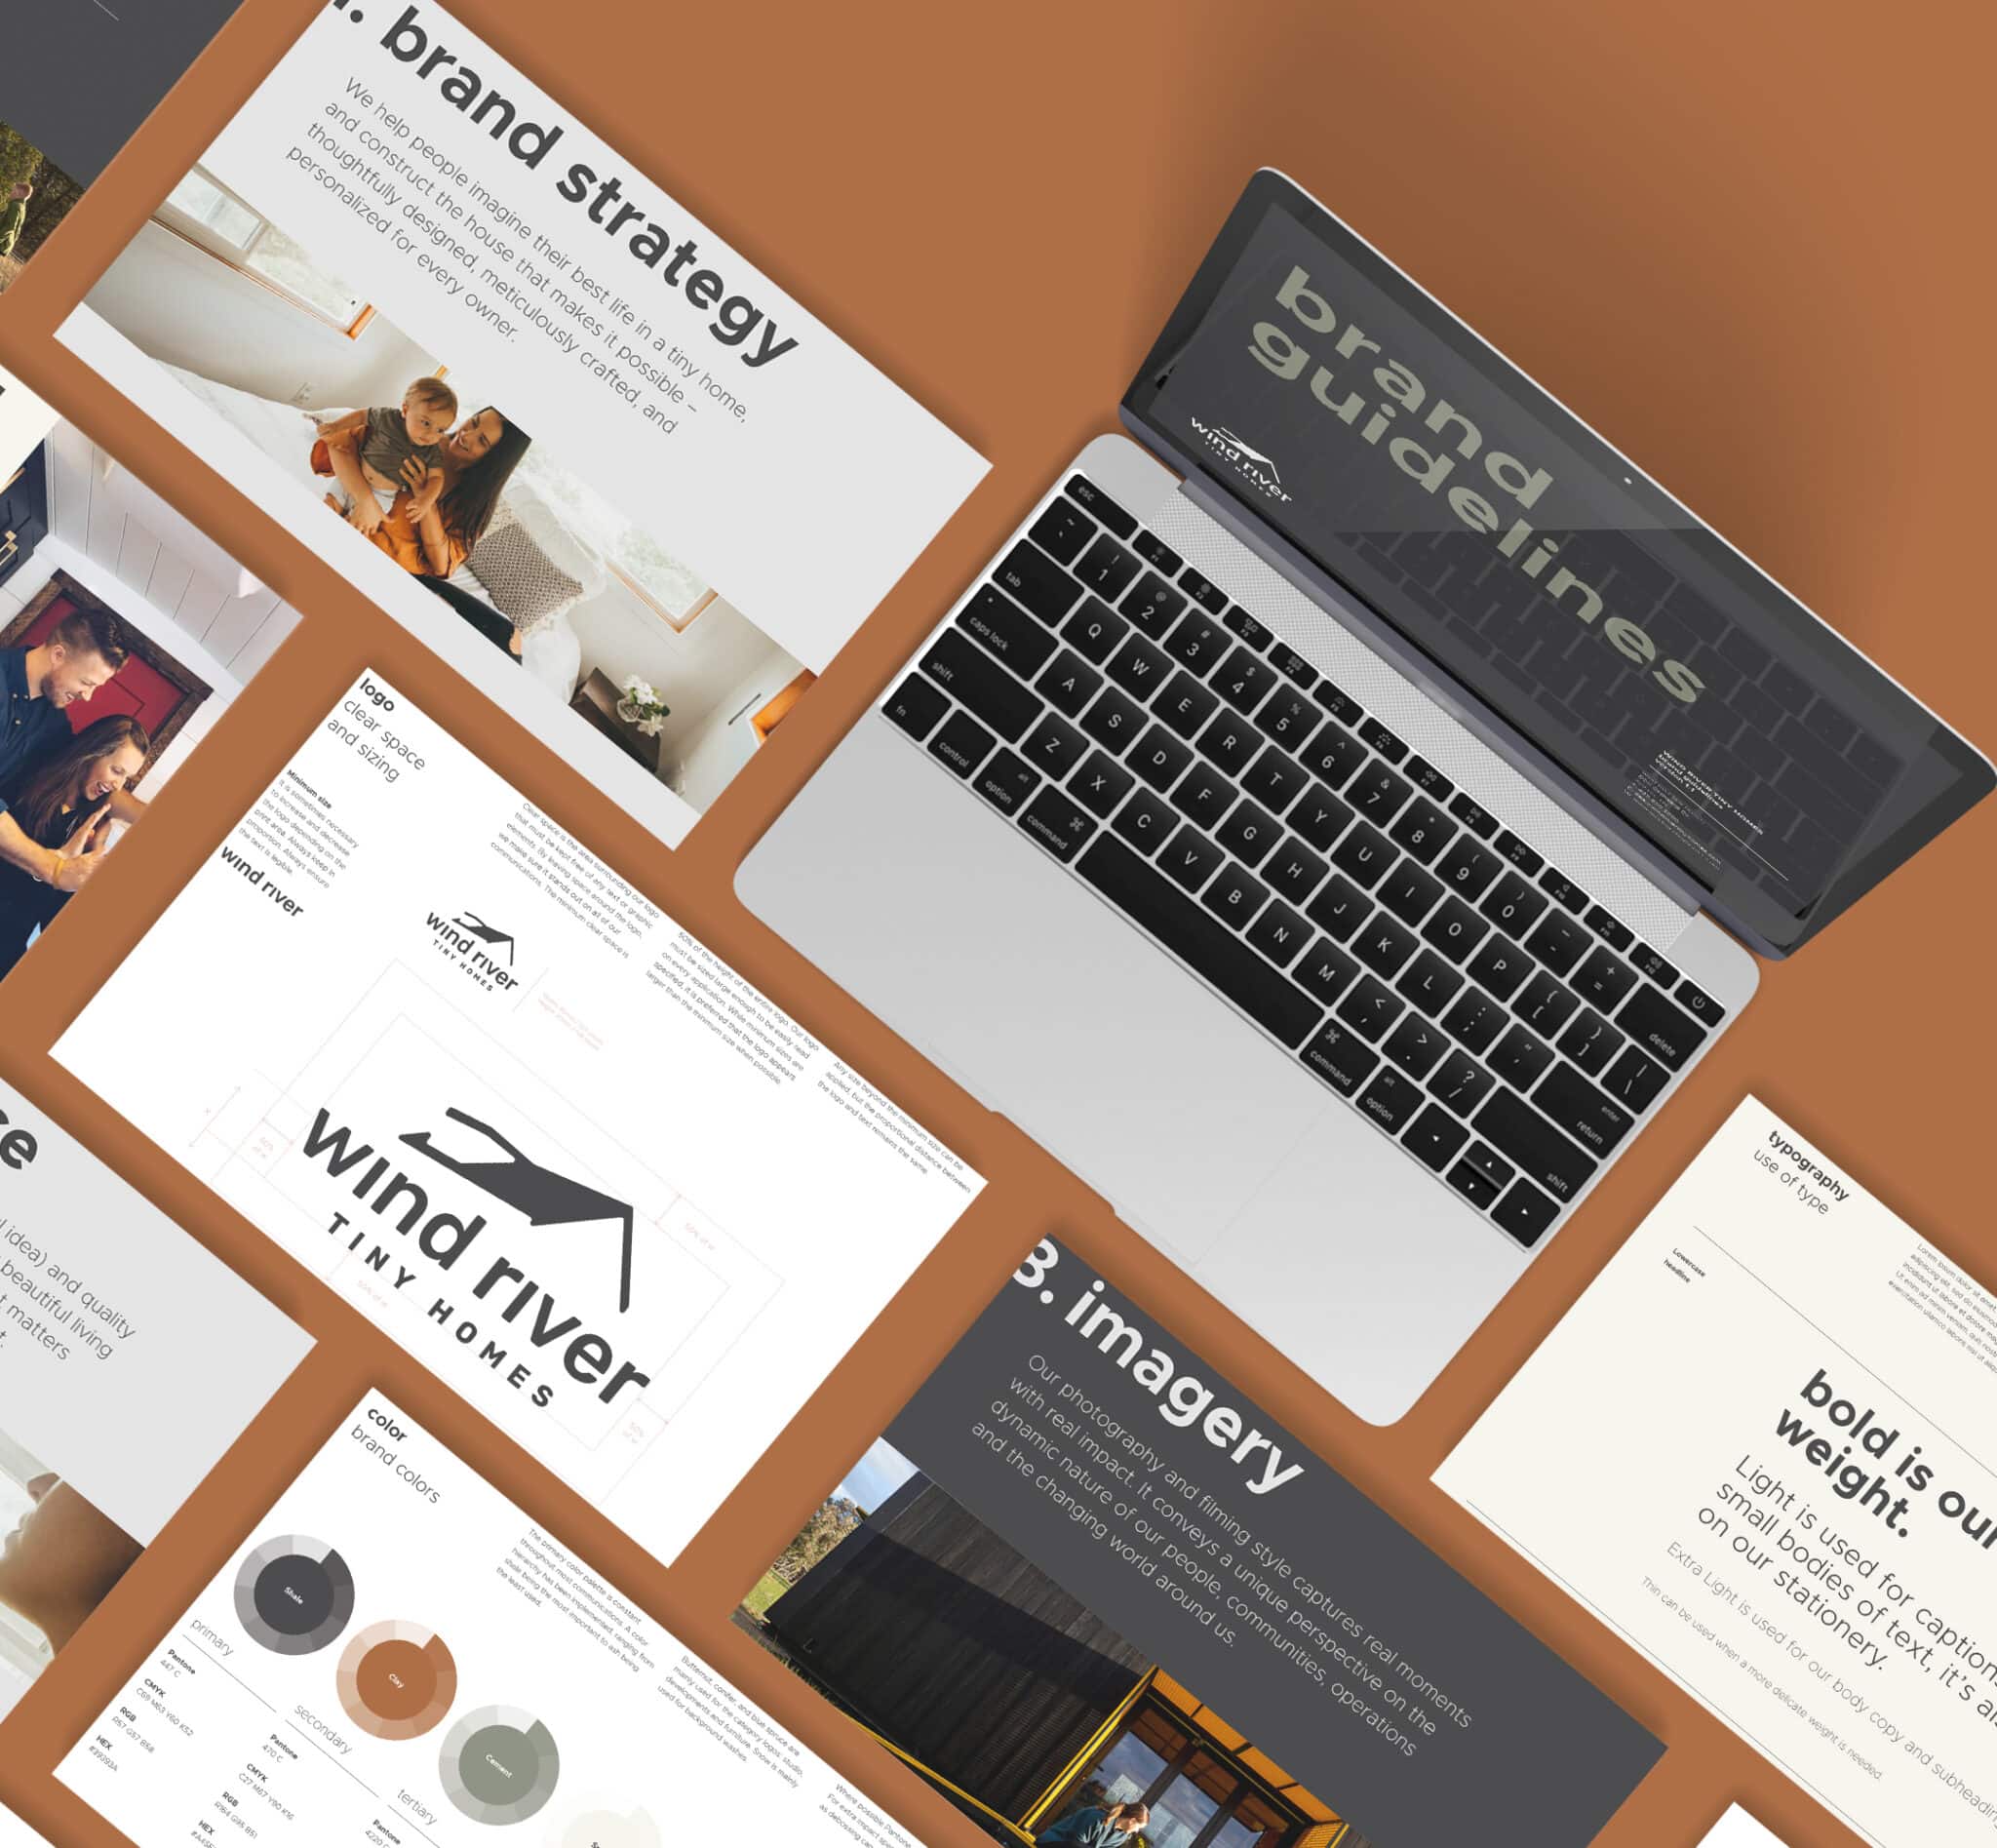 A laptop sits on a brown surface surrounded by various printed brand strategy and guidelines documents. The Big Brand materials include images, graphics, and text about brand strategy, imagery, and brand guidelines for "Wind River Tiny Homes.